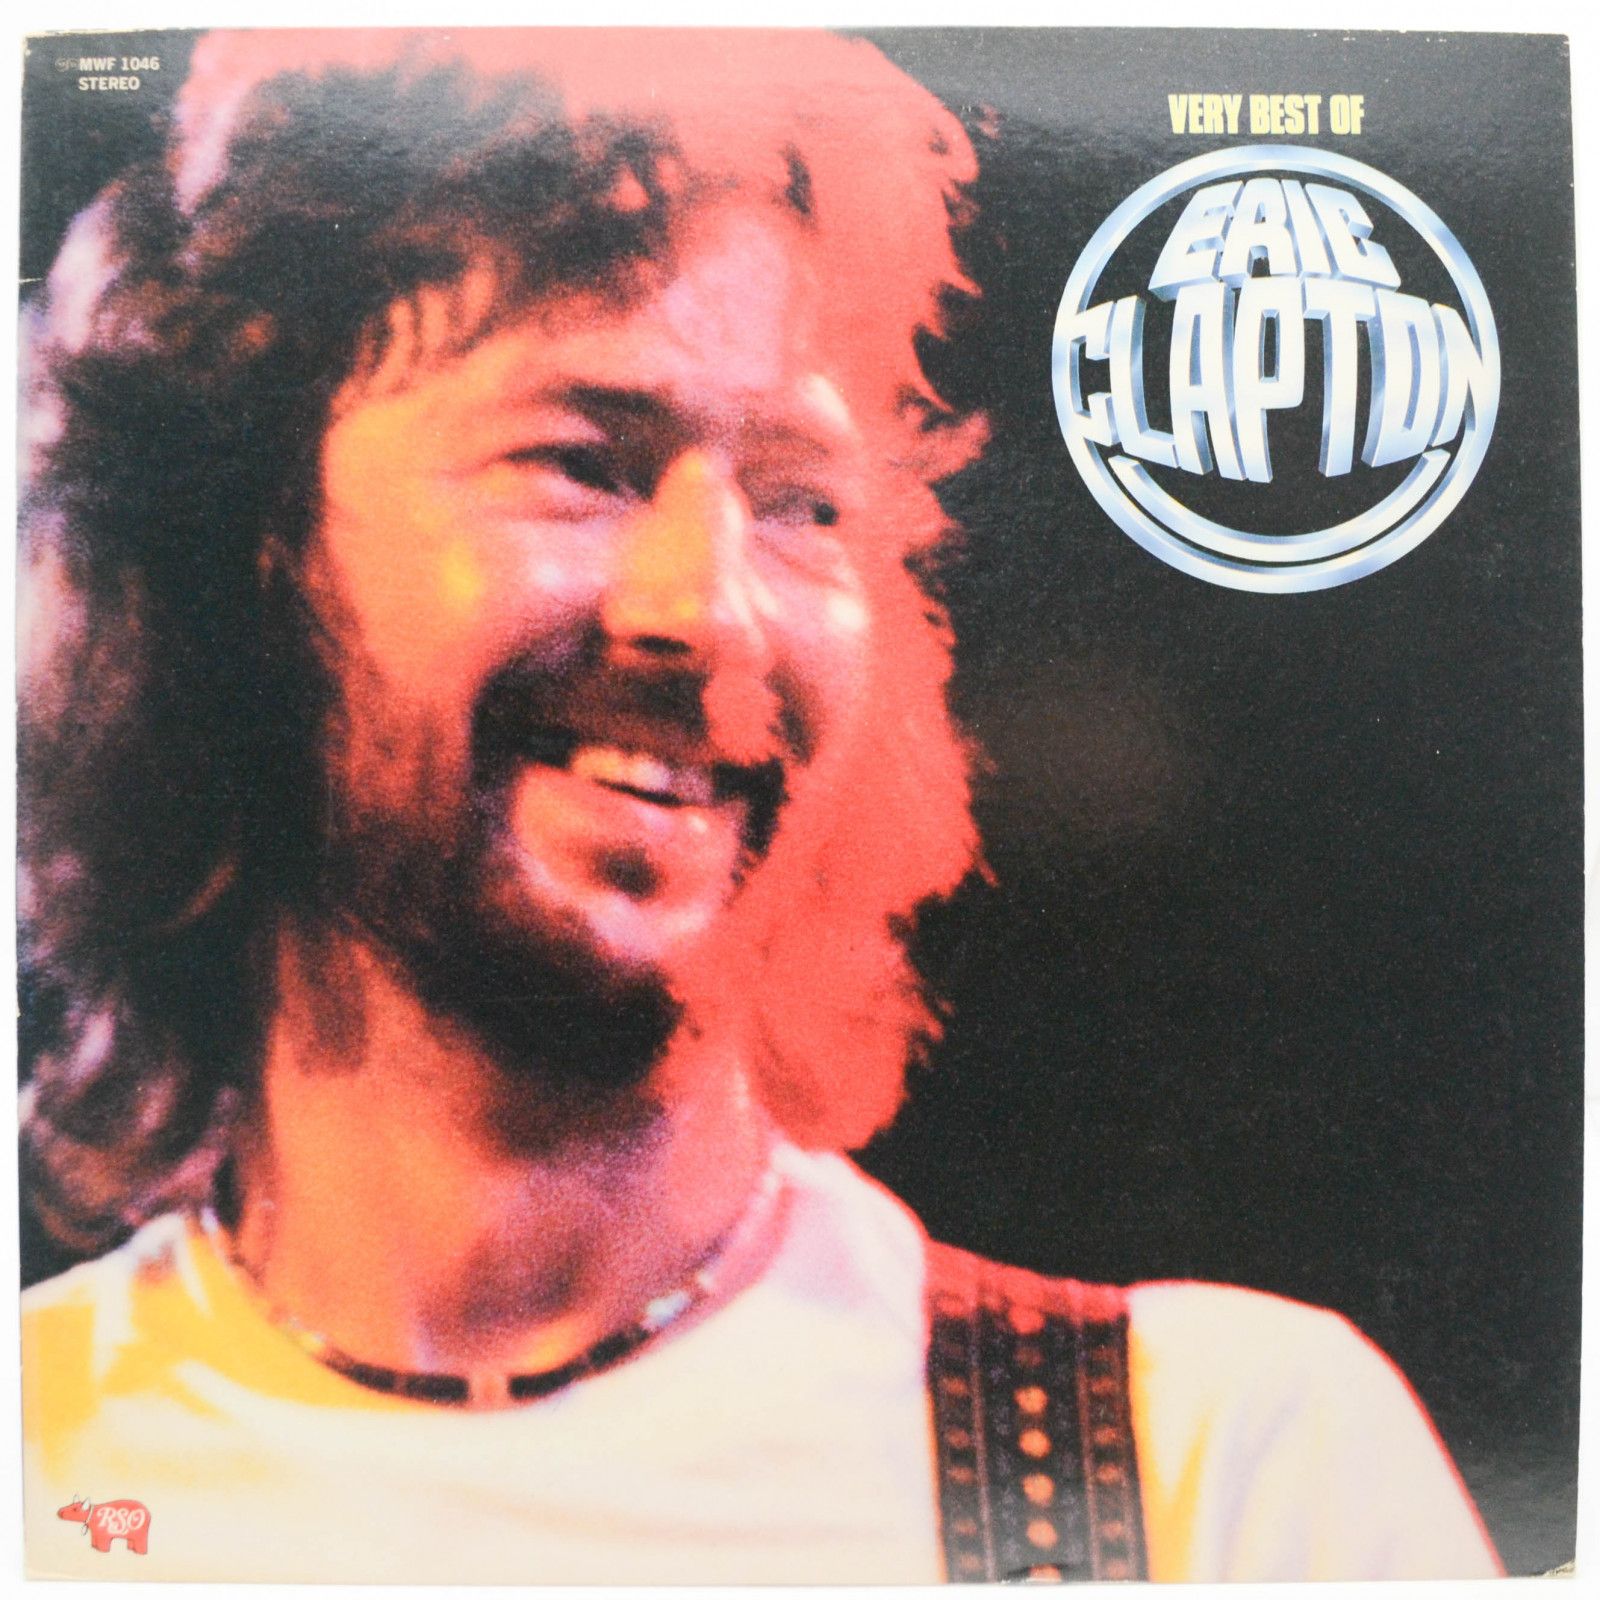 Eric Clapton — Very Best Of Eric Clapton, 1978